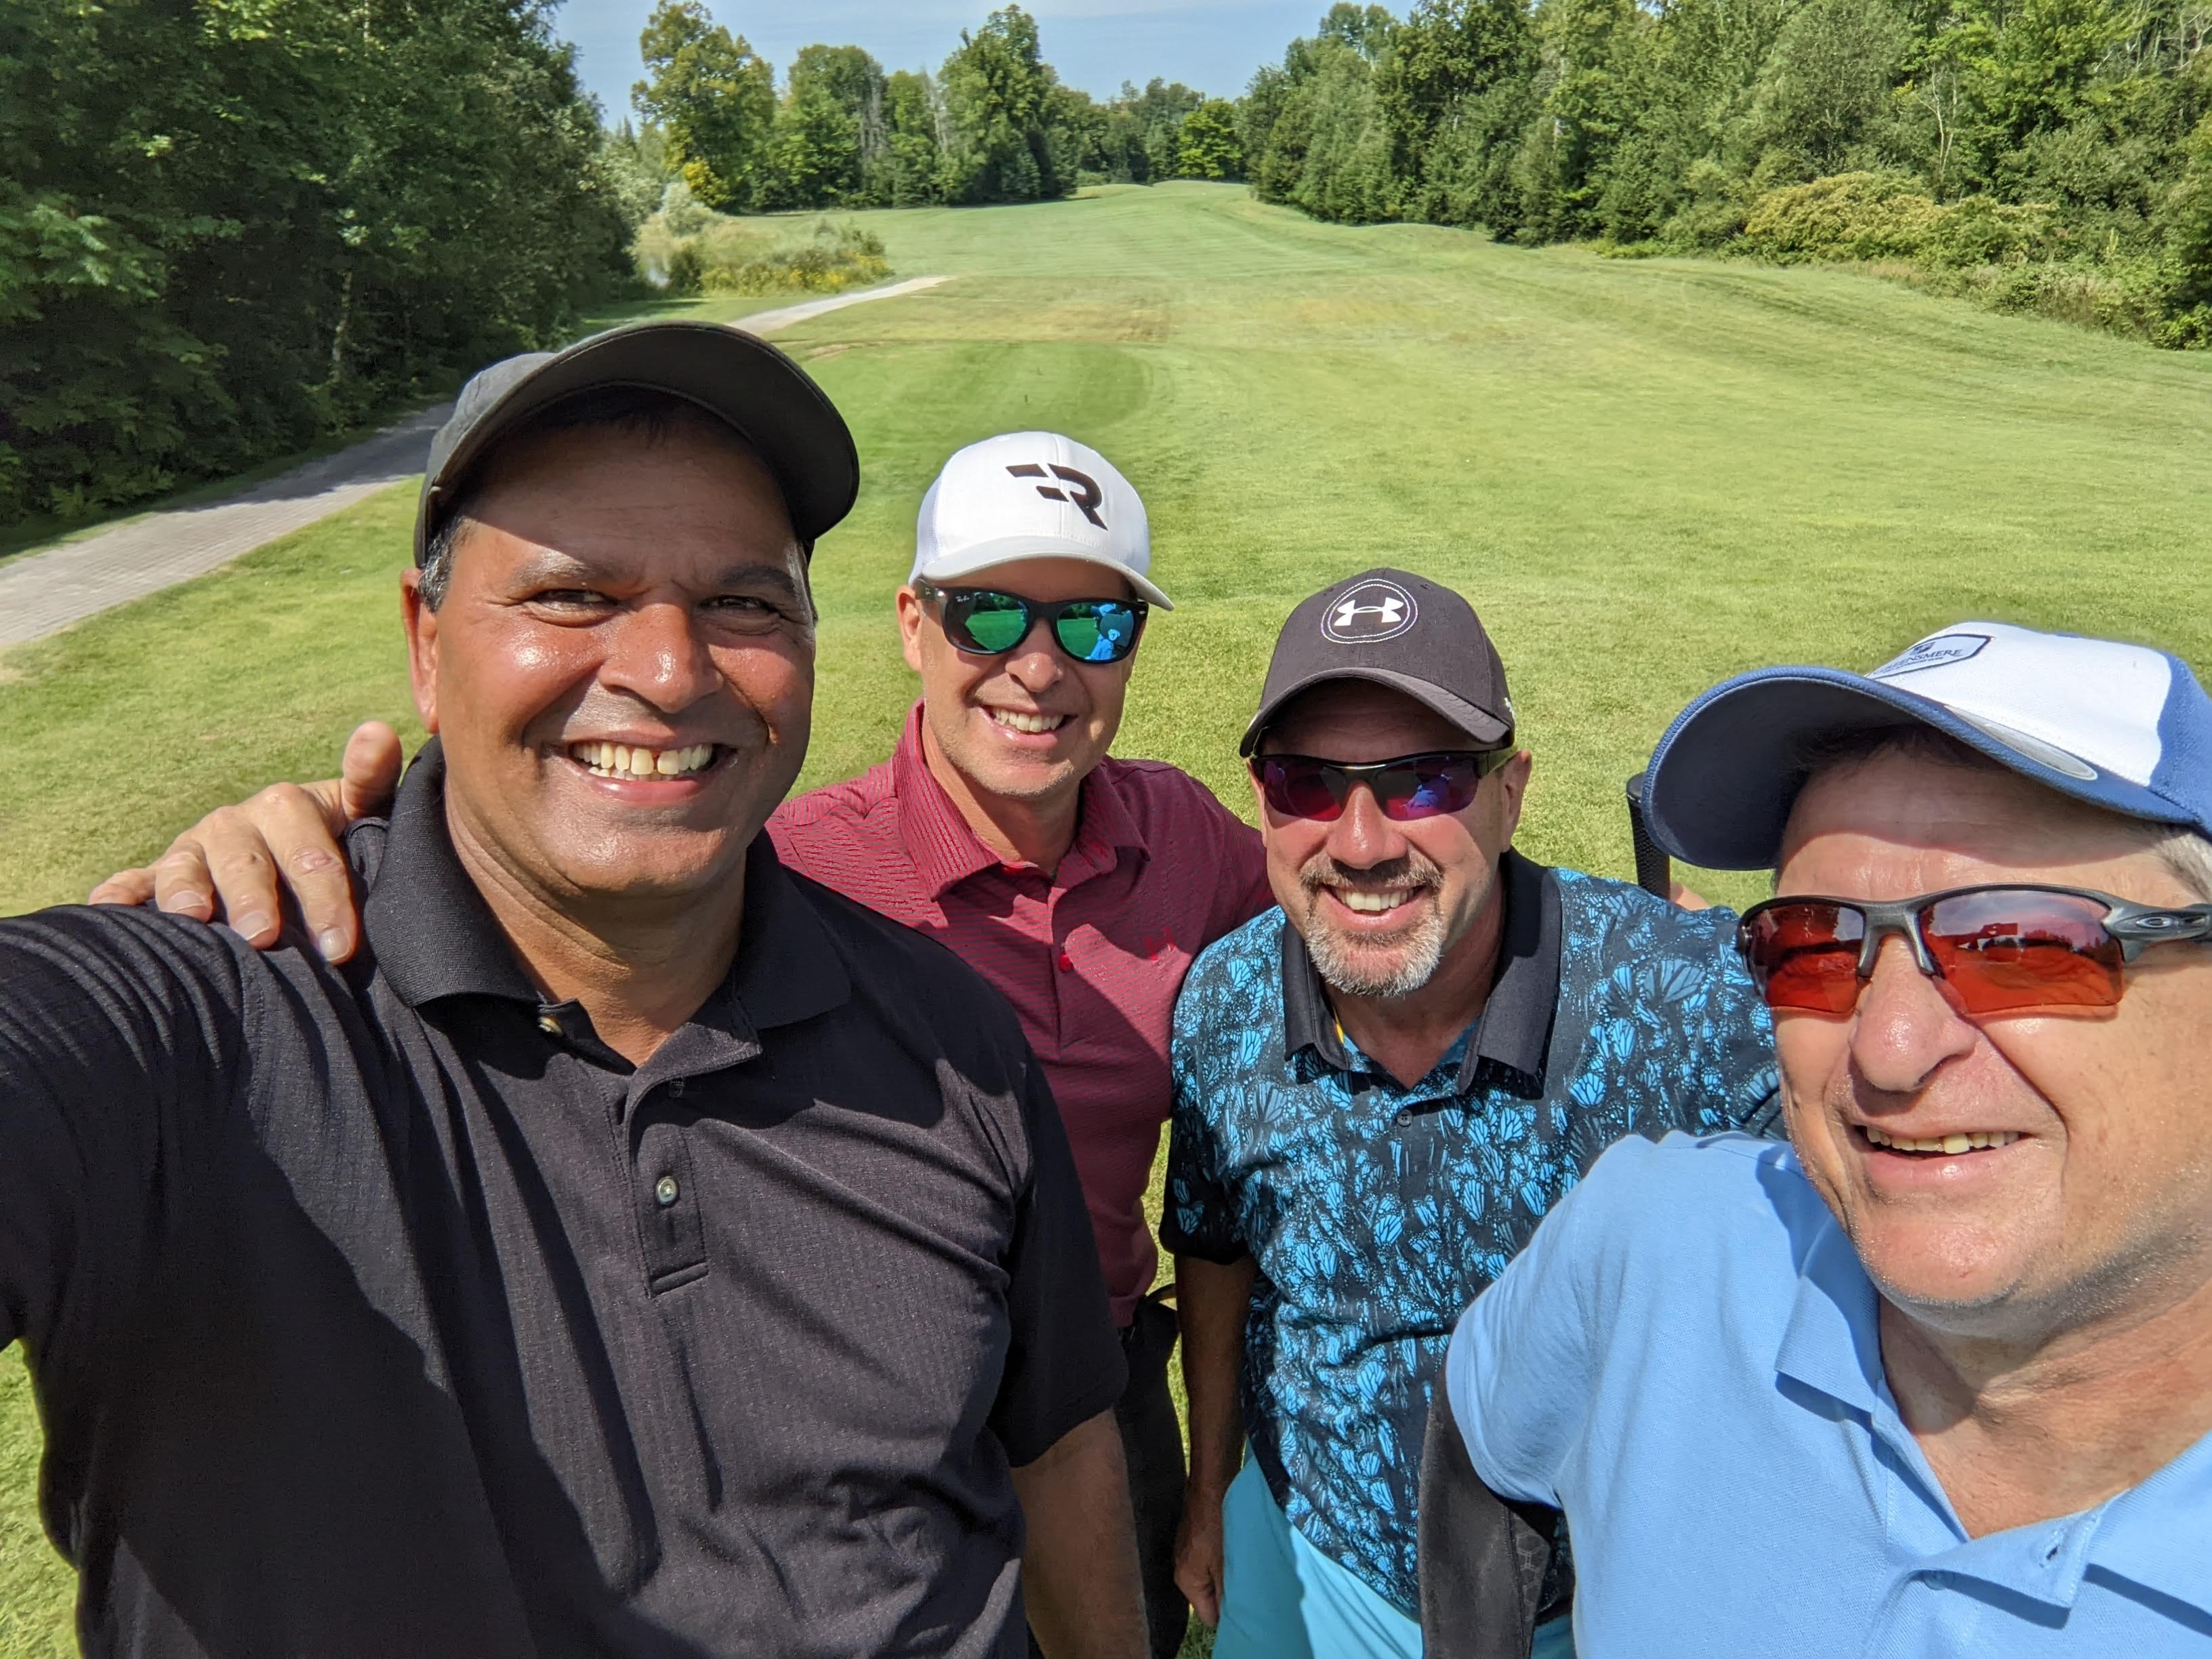 Selfie of four men smiling on golf course